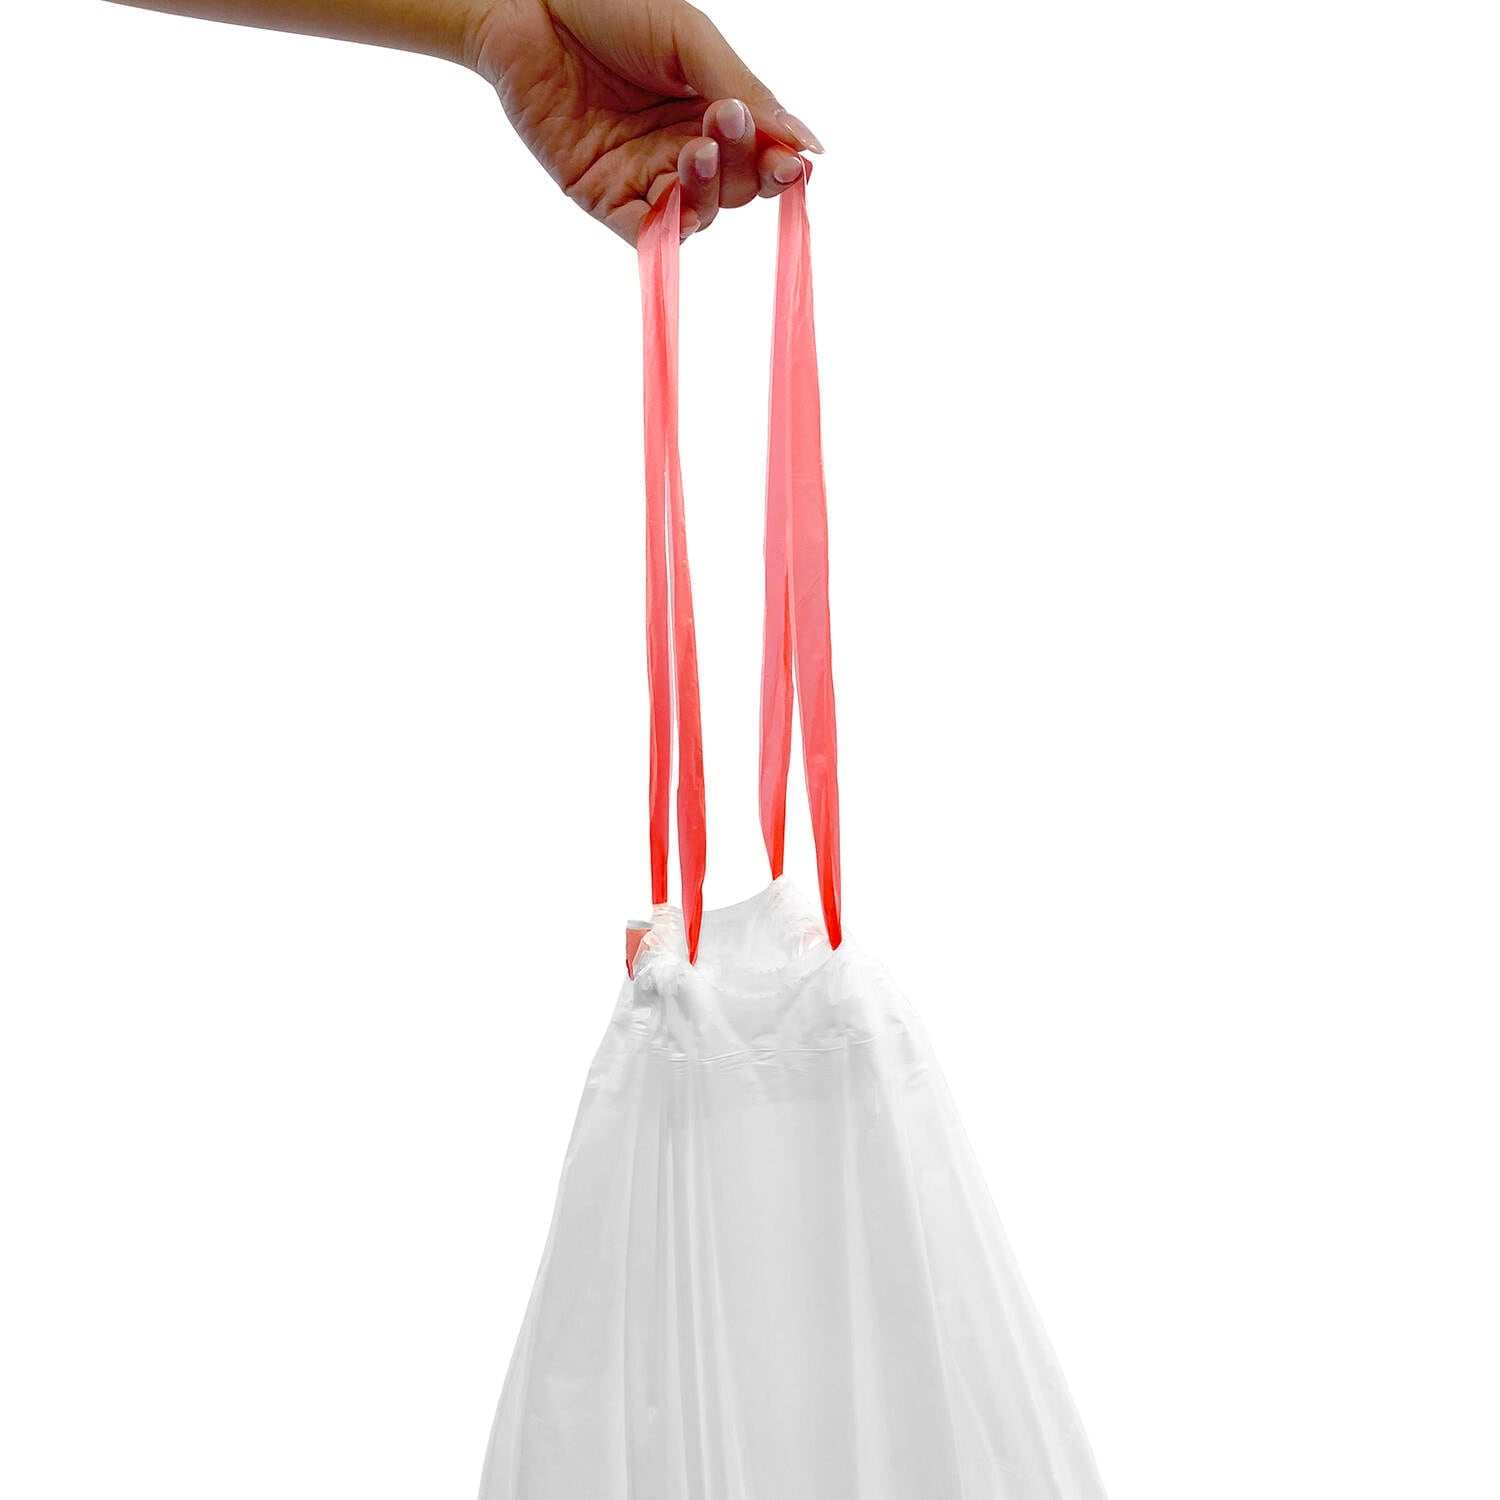 https://ak1.ostkcdn.com/images/products/is/images/direct/fddbca3ca7bcd8e107388e5ca5a473ab9dc9c507/Drawstring-Trash-Bags%2C-40-Liter---10.5-Gallon%2C-30-Count.jpg